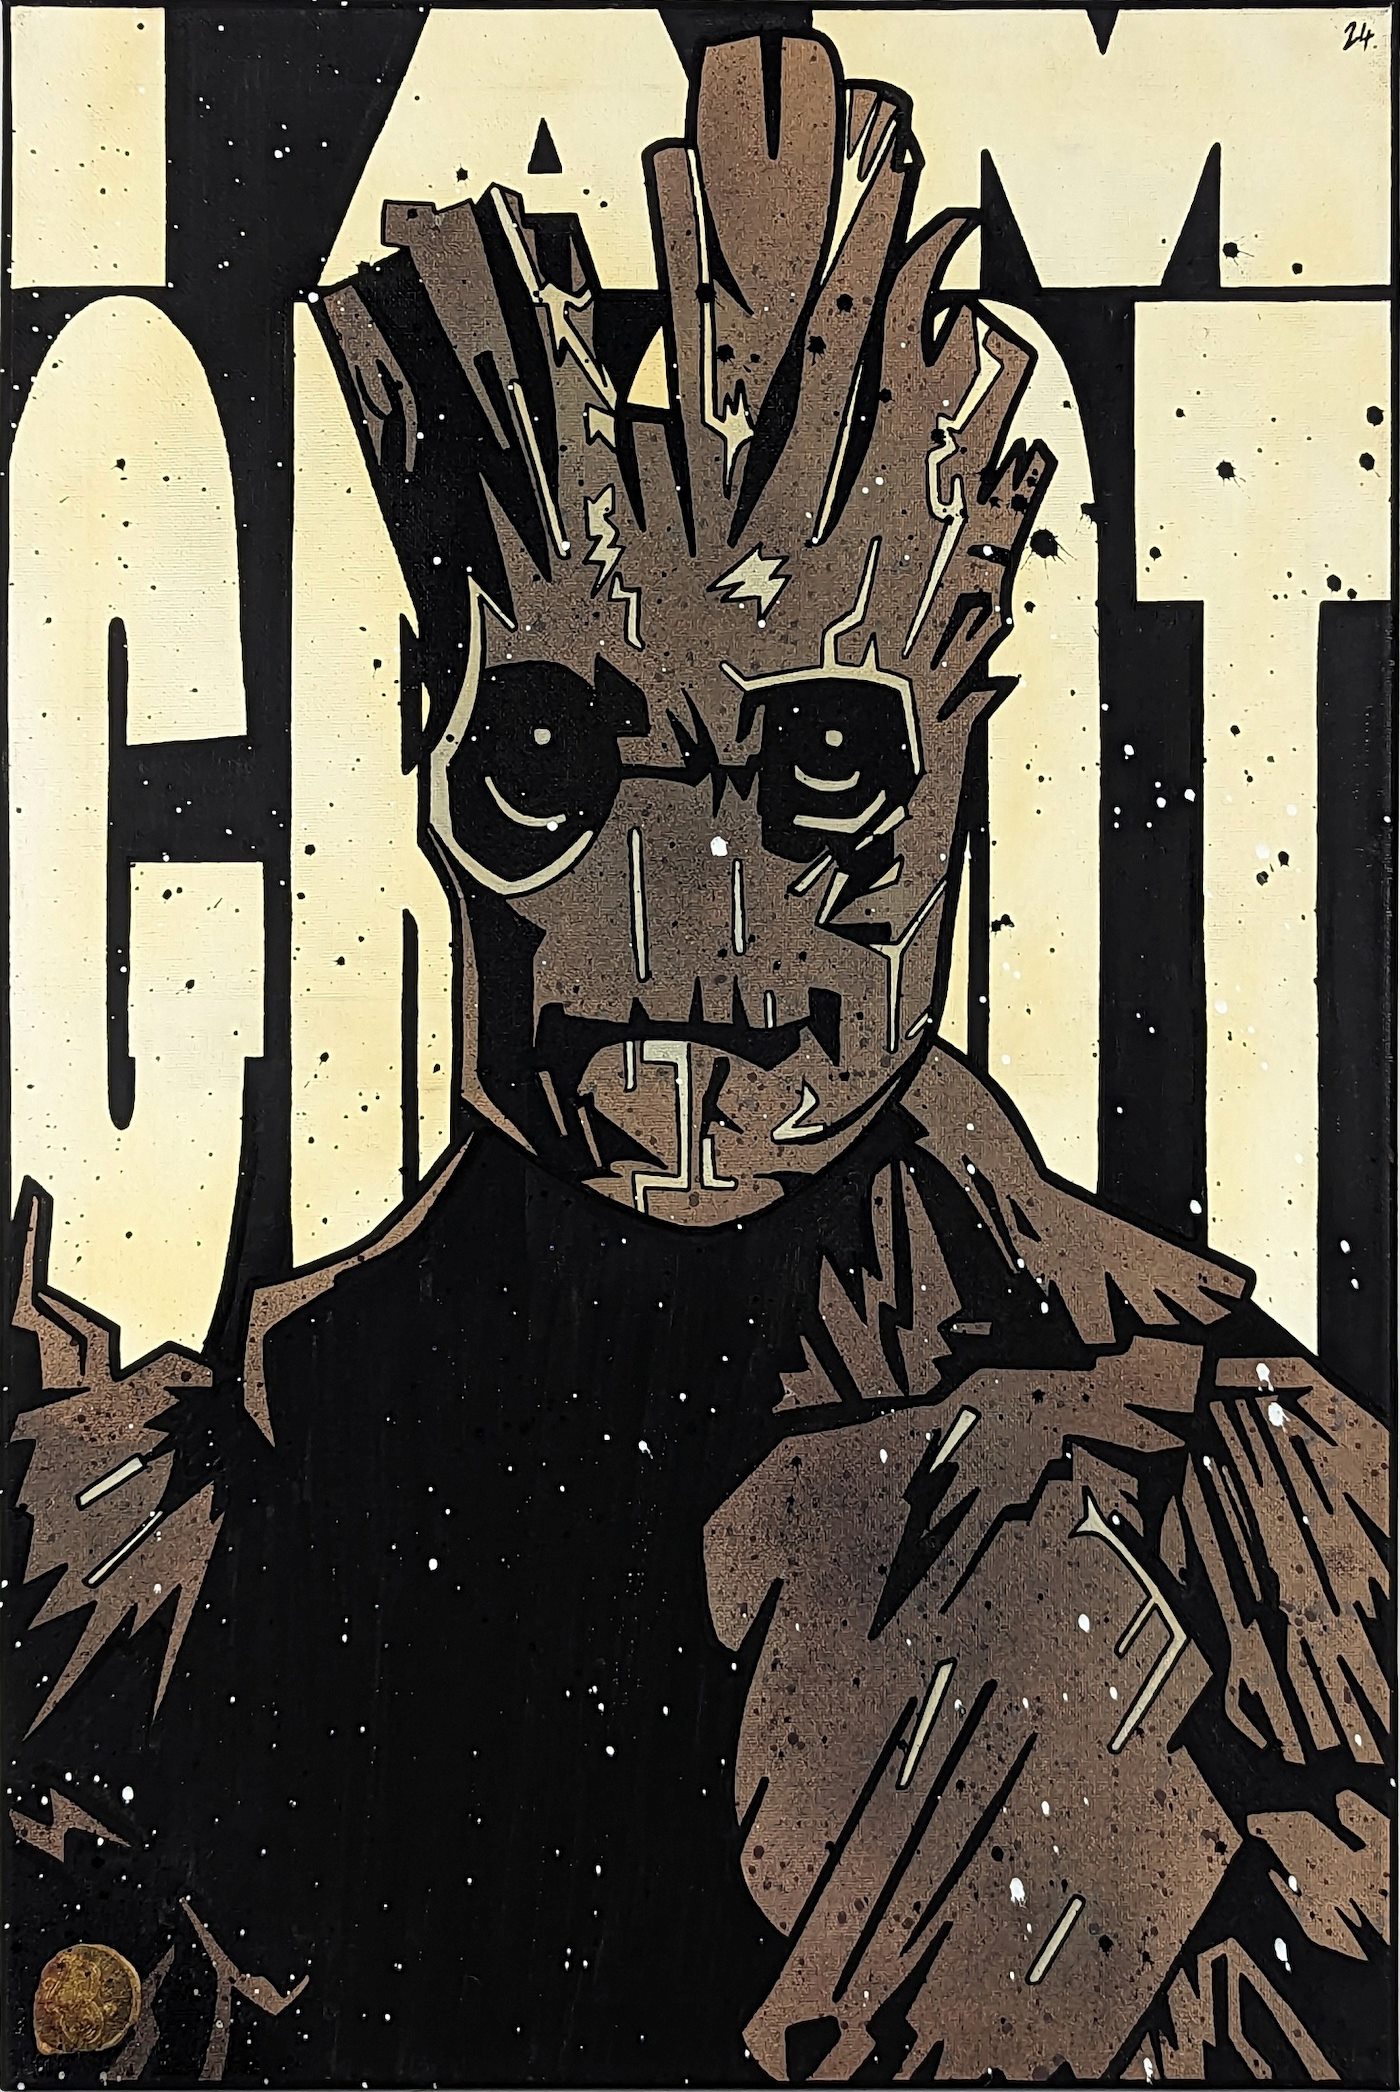 Meon Smells - I'am Groot